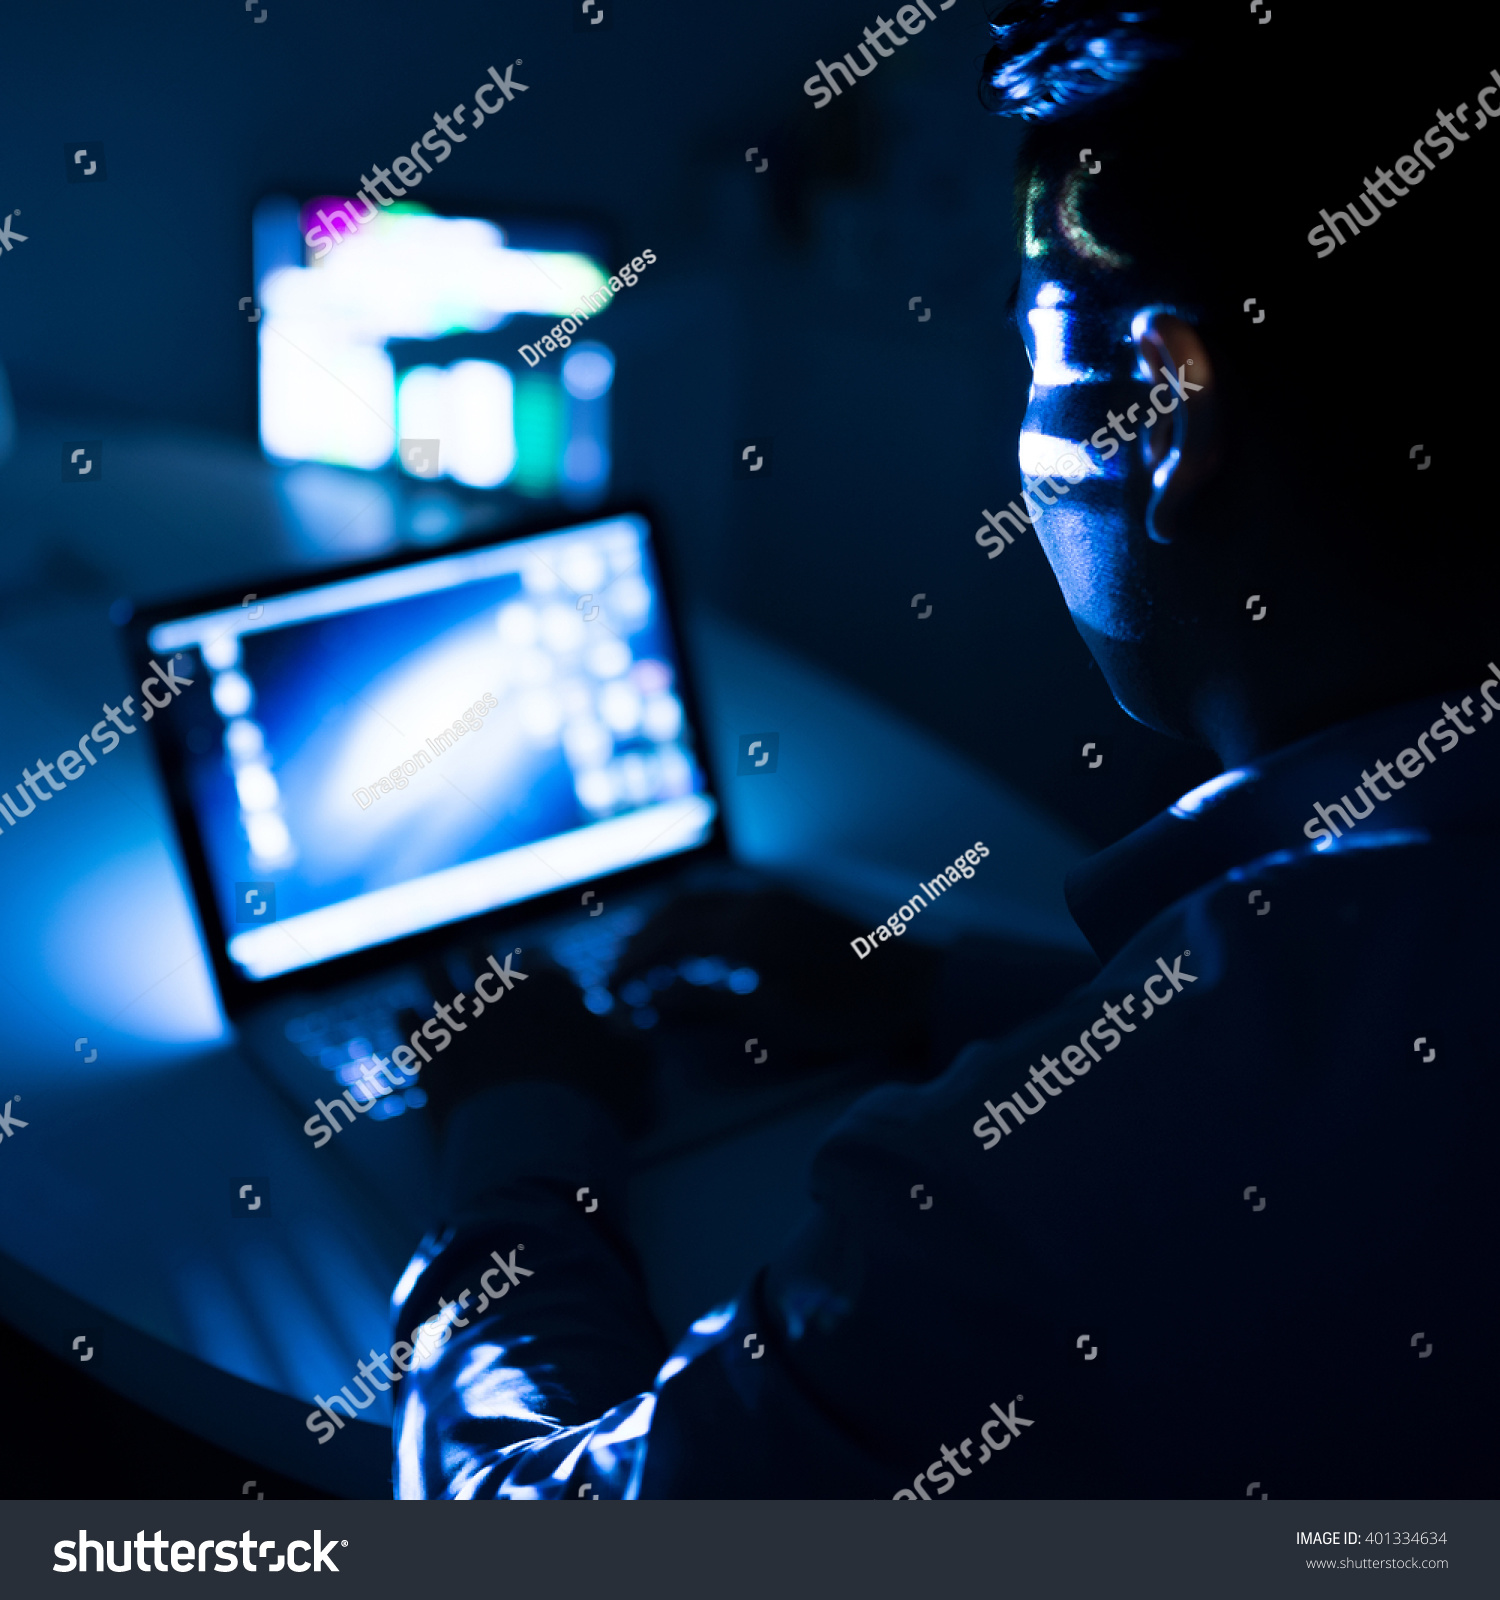 Programmer Computing Night View Over Shoulder Stock Photo 401334634 ...